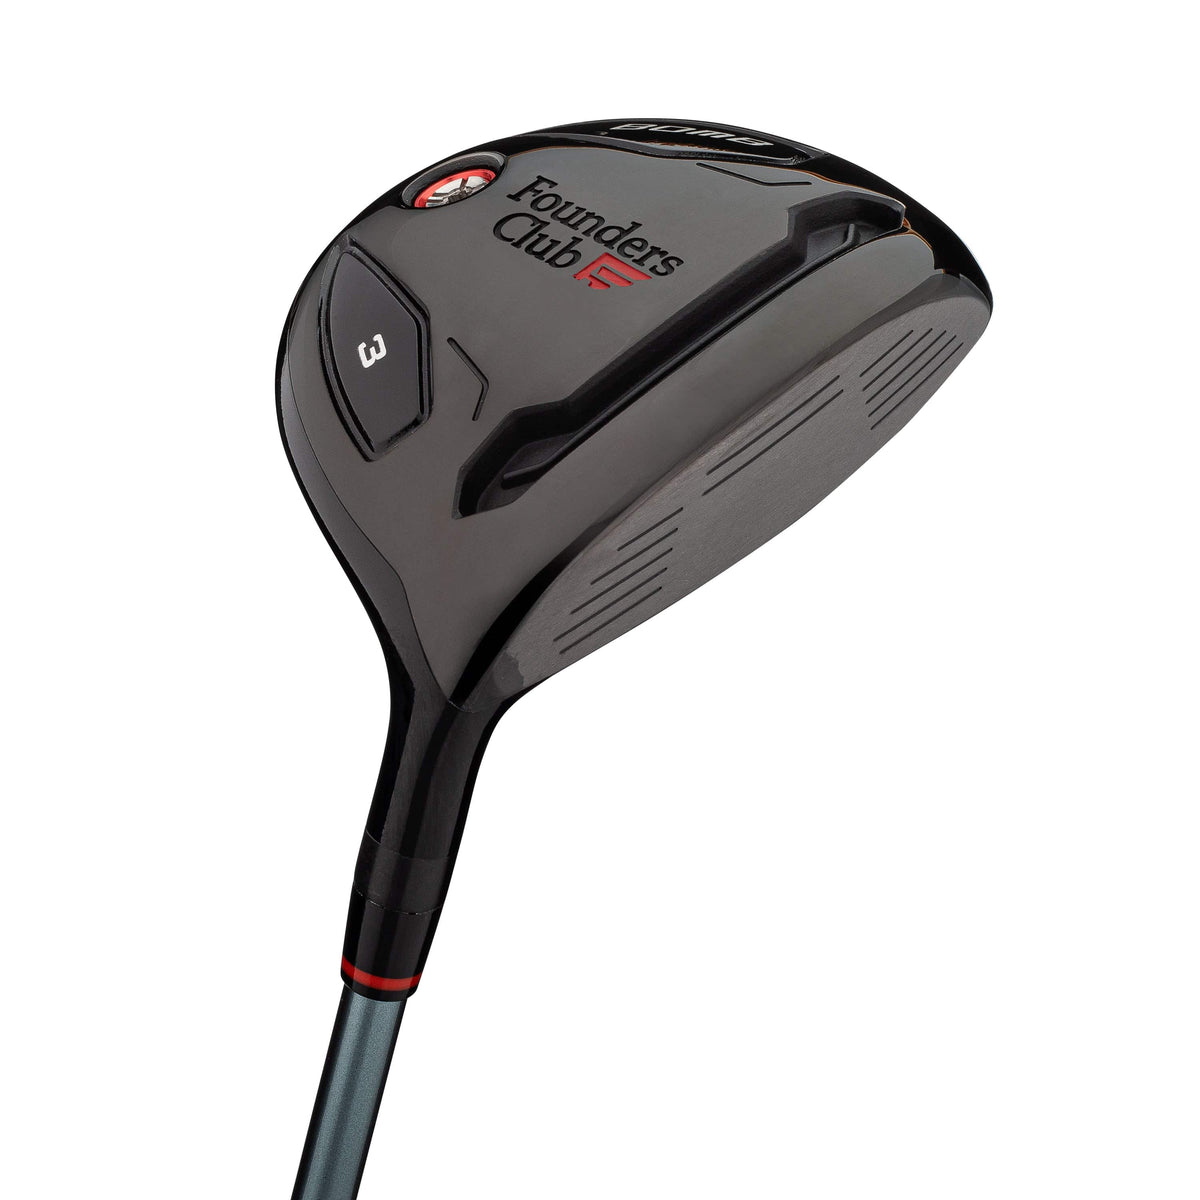 Founders Club Golf Bomb 3 Fairway Wood with Head Cover